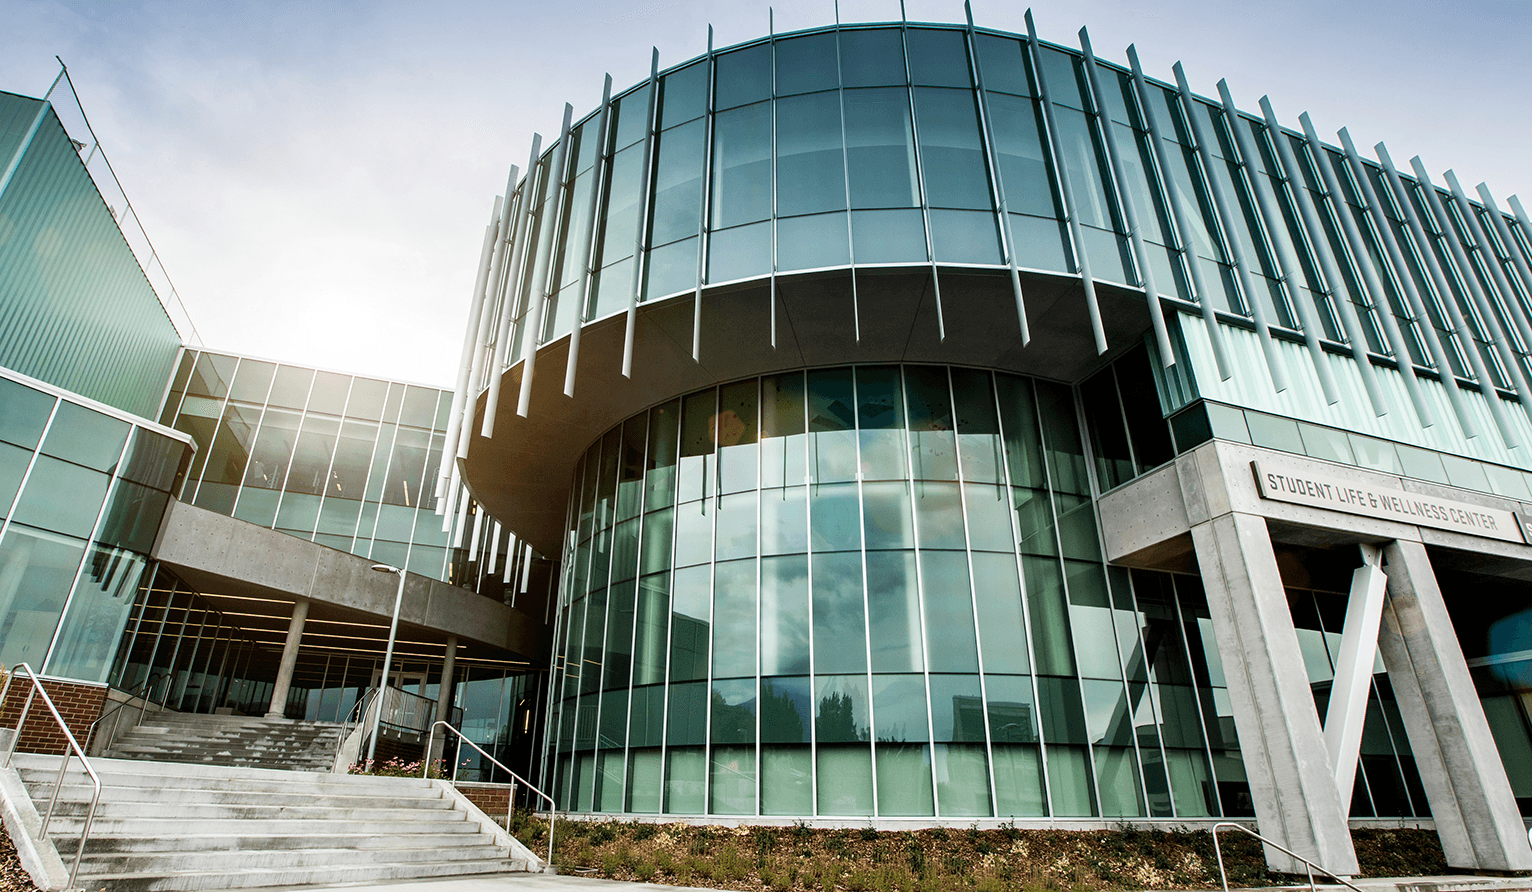 A building on UVU campus